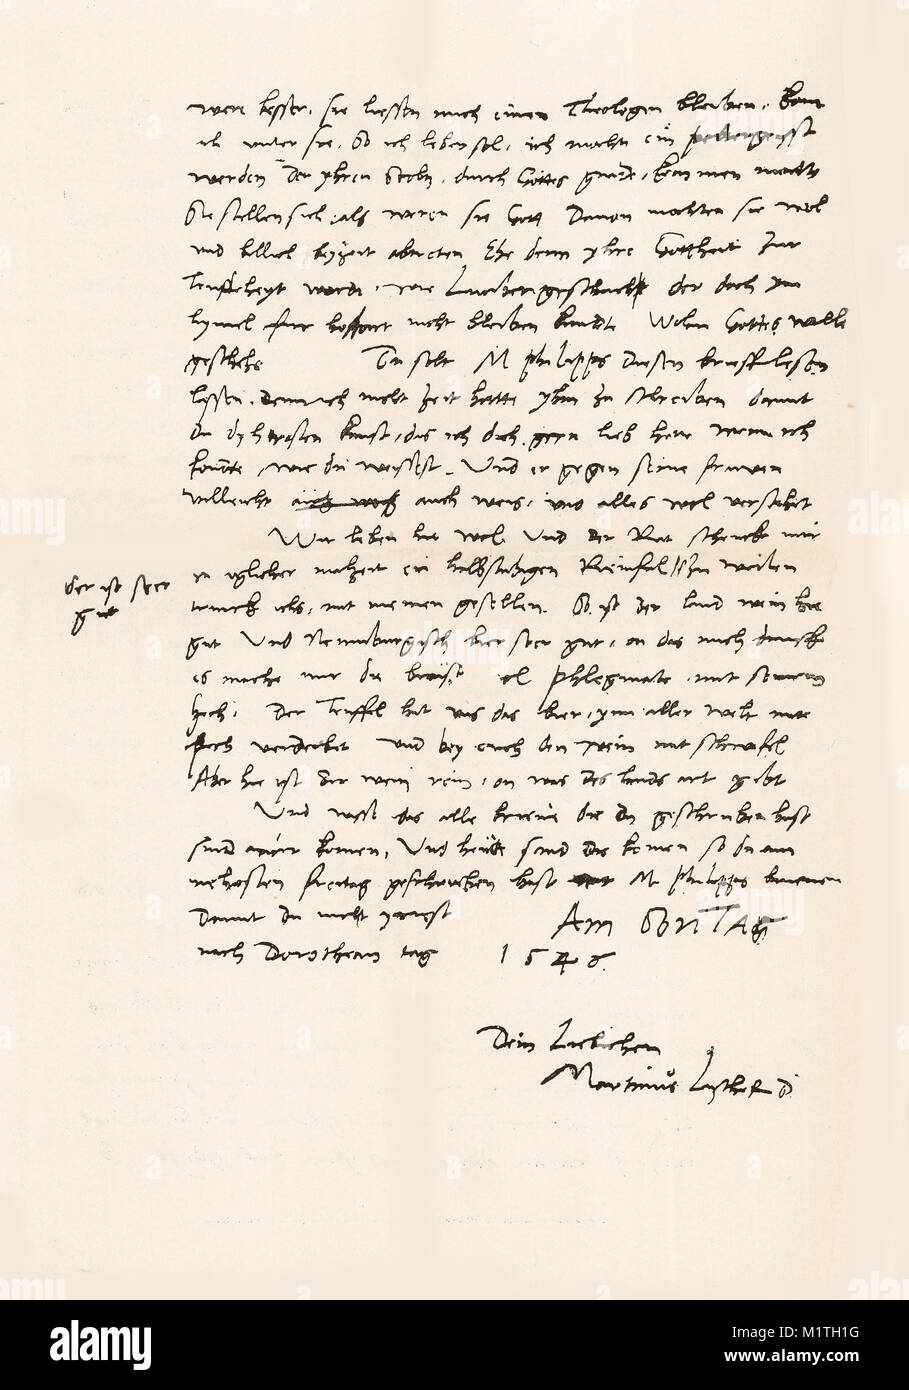 Second half of a facsimile of a letter written from Luther to his wife on February 7, 1546. From The Life of Luther by Kostlin, 1900 Stock Photo